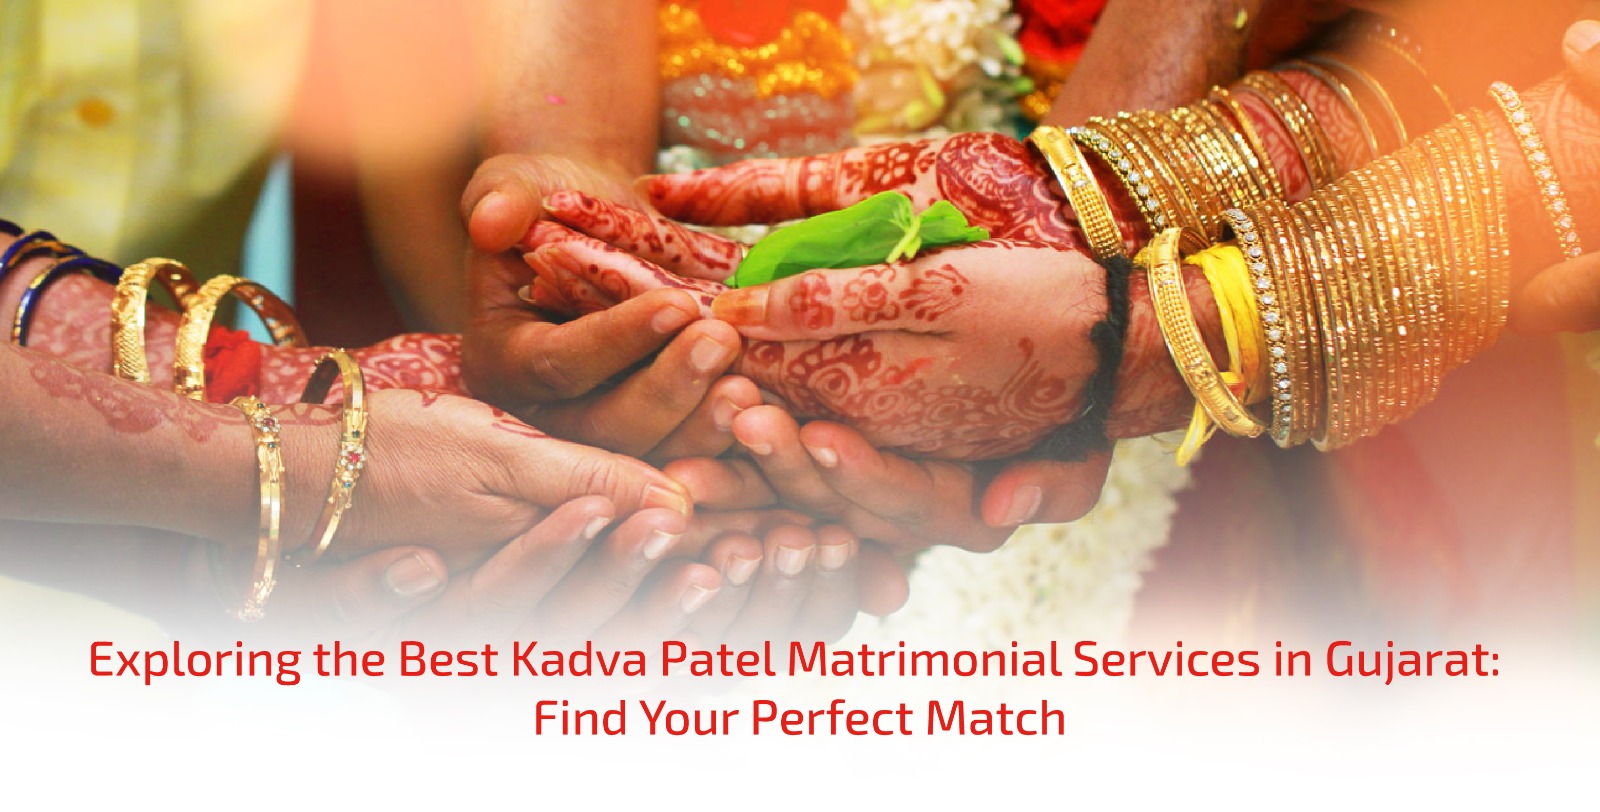 Exploring the Best Kadva Patel Matrimonial Services in Gujarat: Find Your Perfect Match